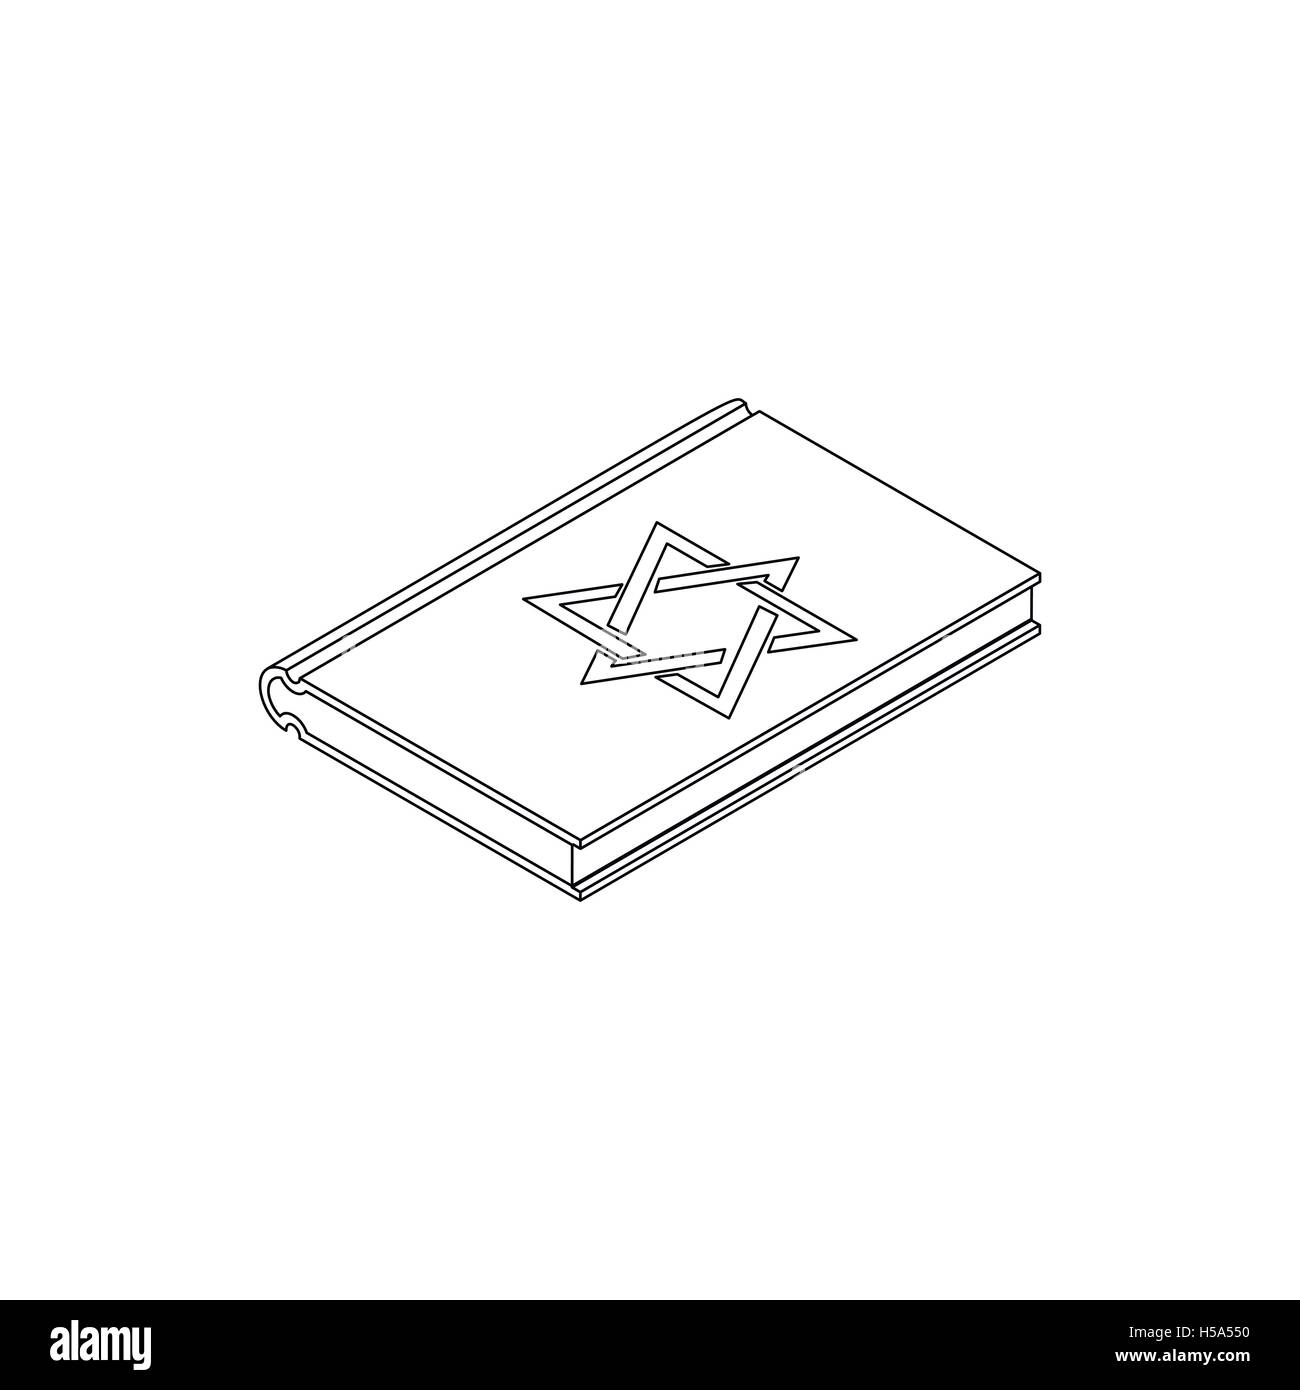 Talmud pentateuch, isometric 3d Stock Vector